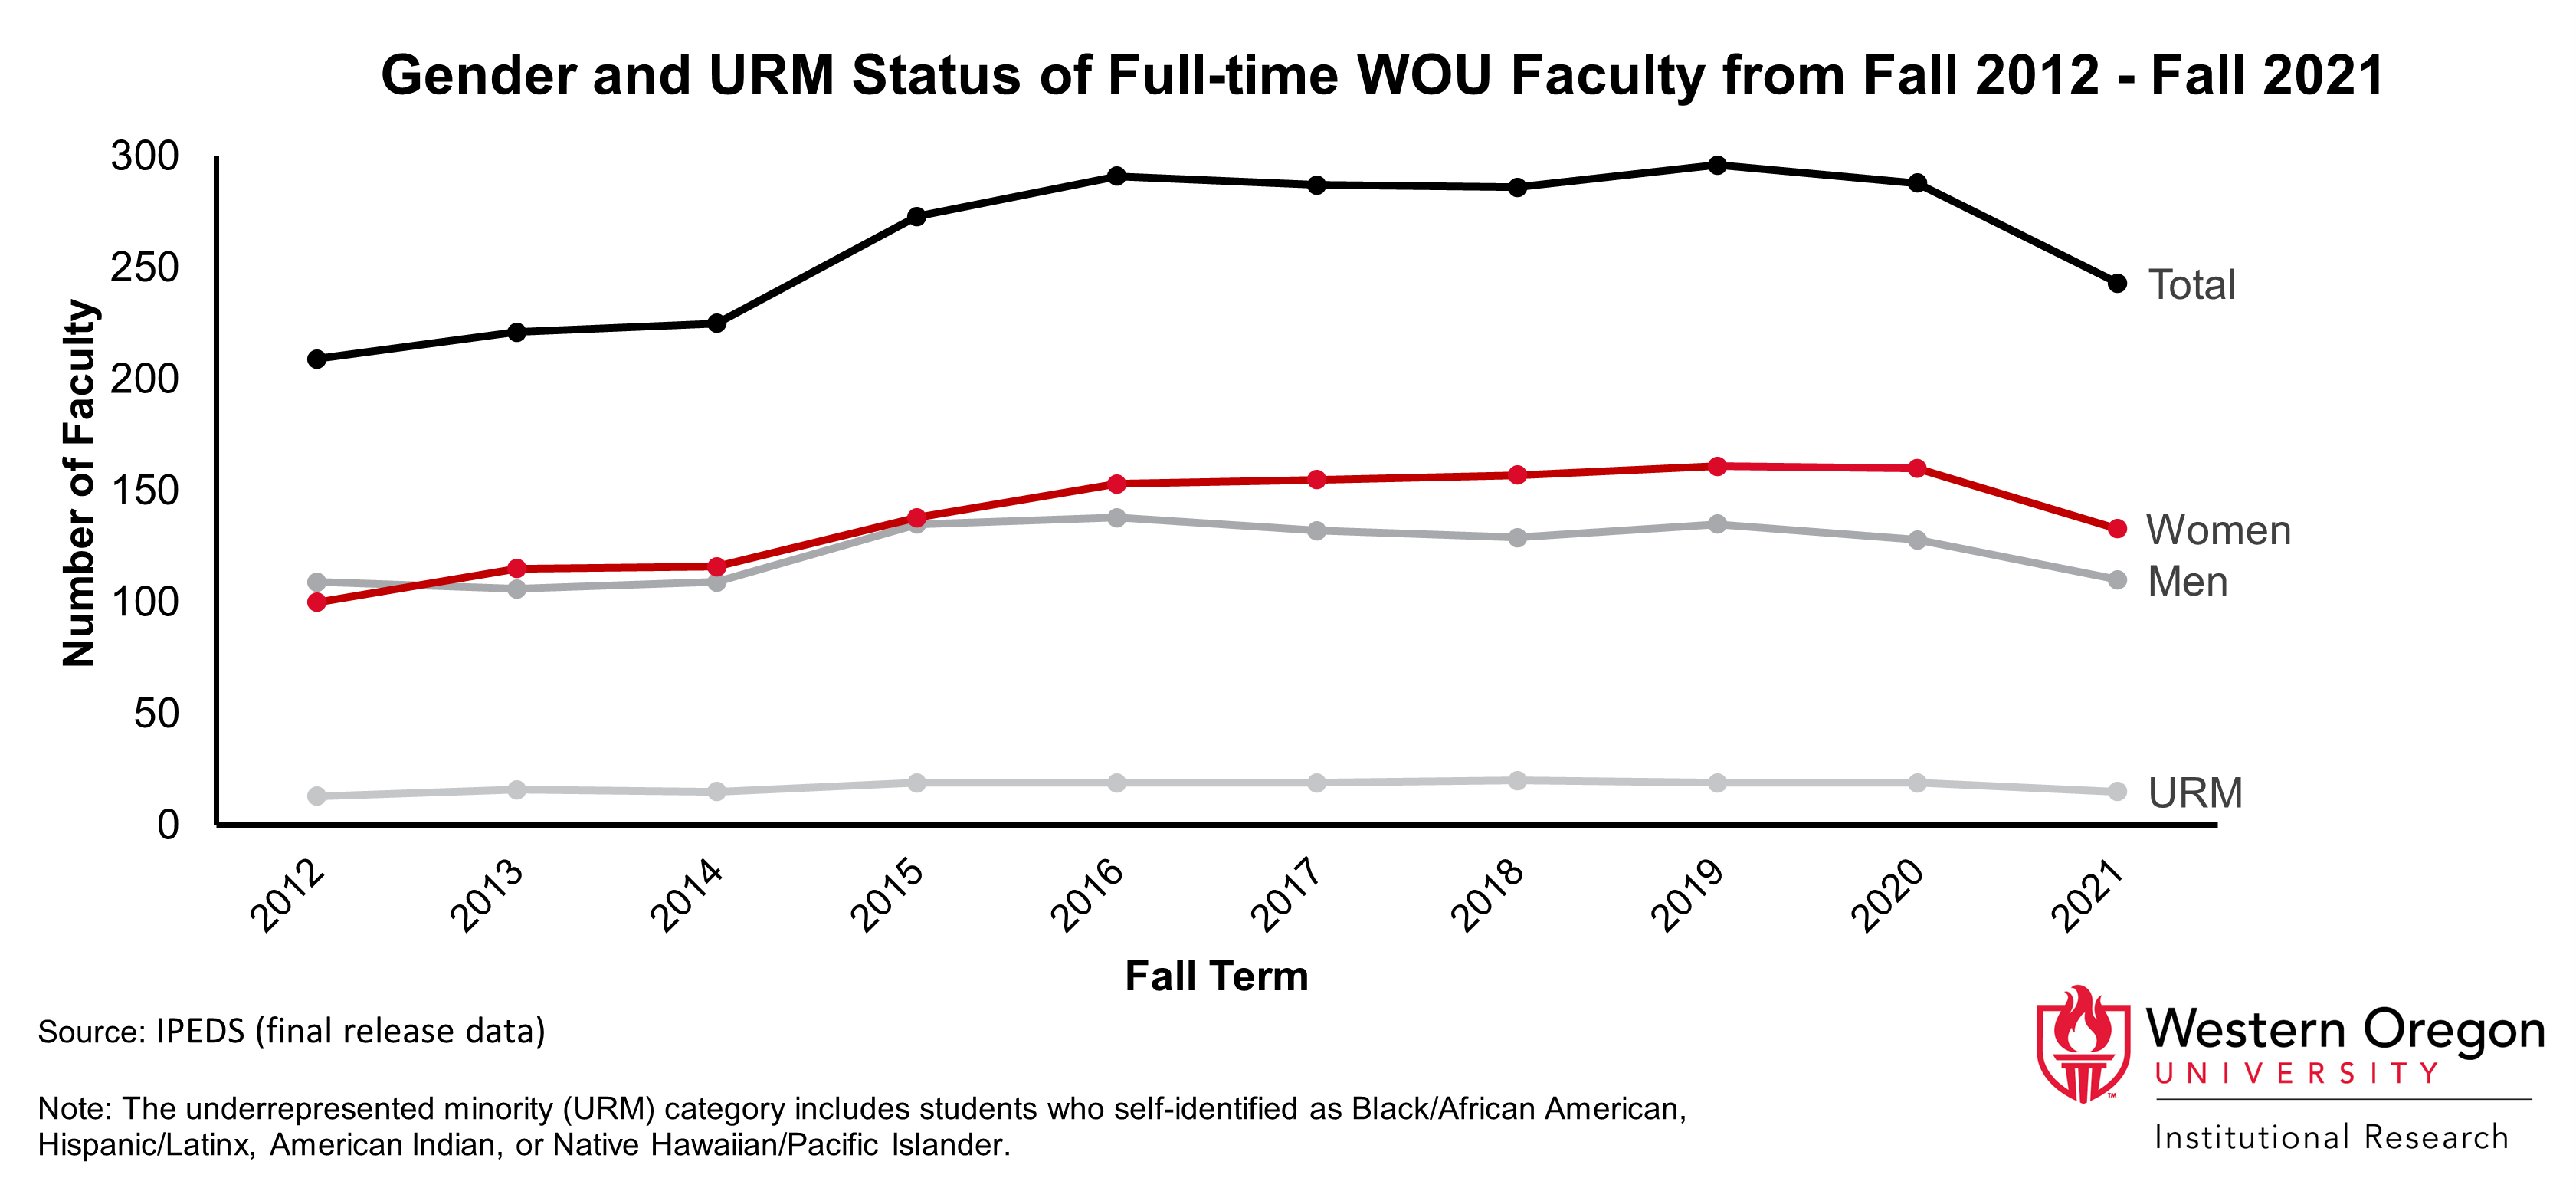 Line graph of counts for full-time faculty at WOU since 2012, broken out by race and URM status, showing that the number of faculty began increasing in 2015, but less so for URM faculty